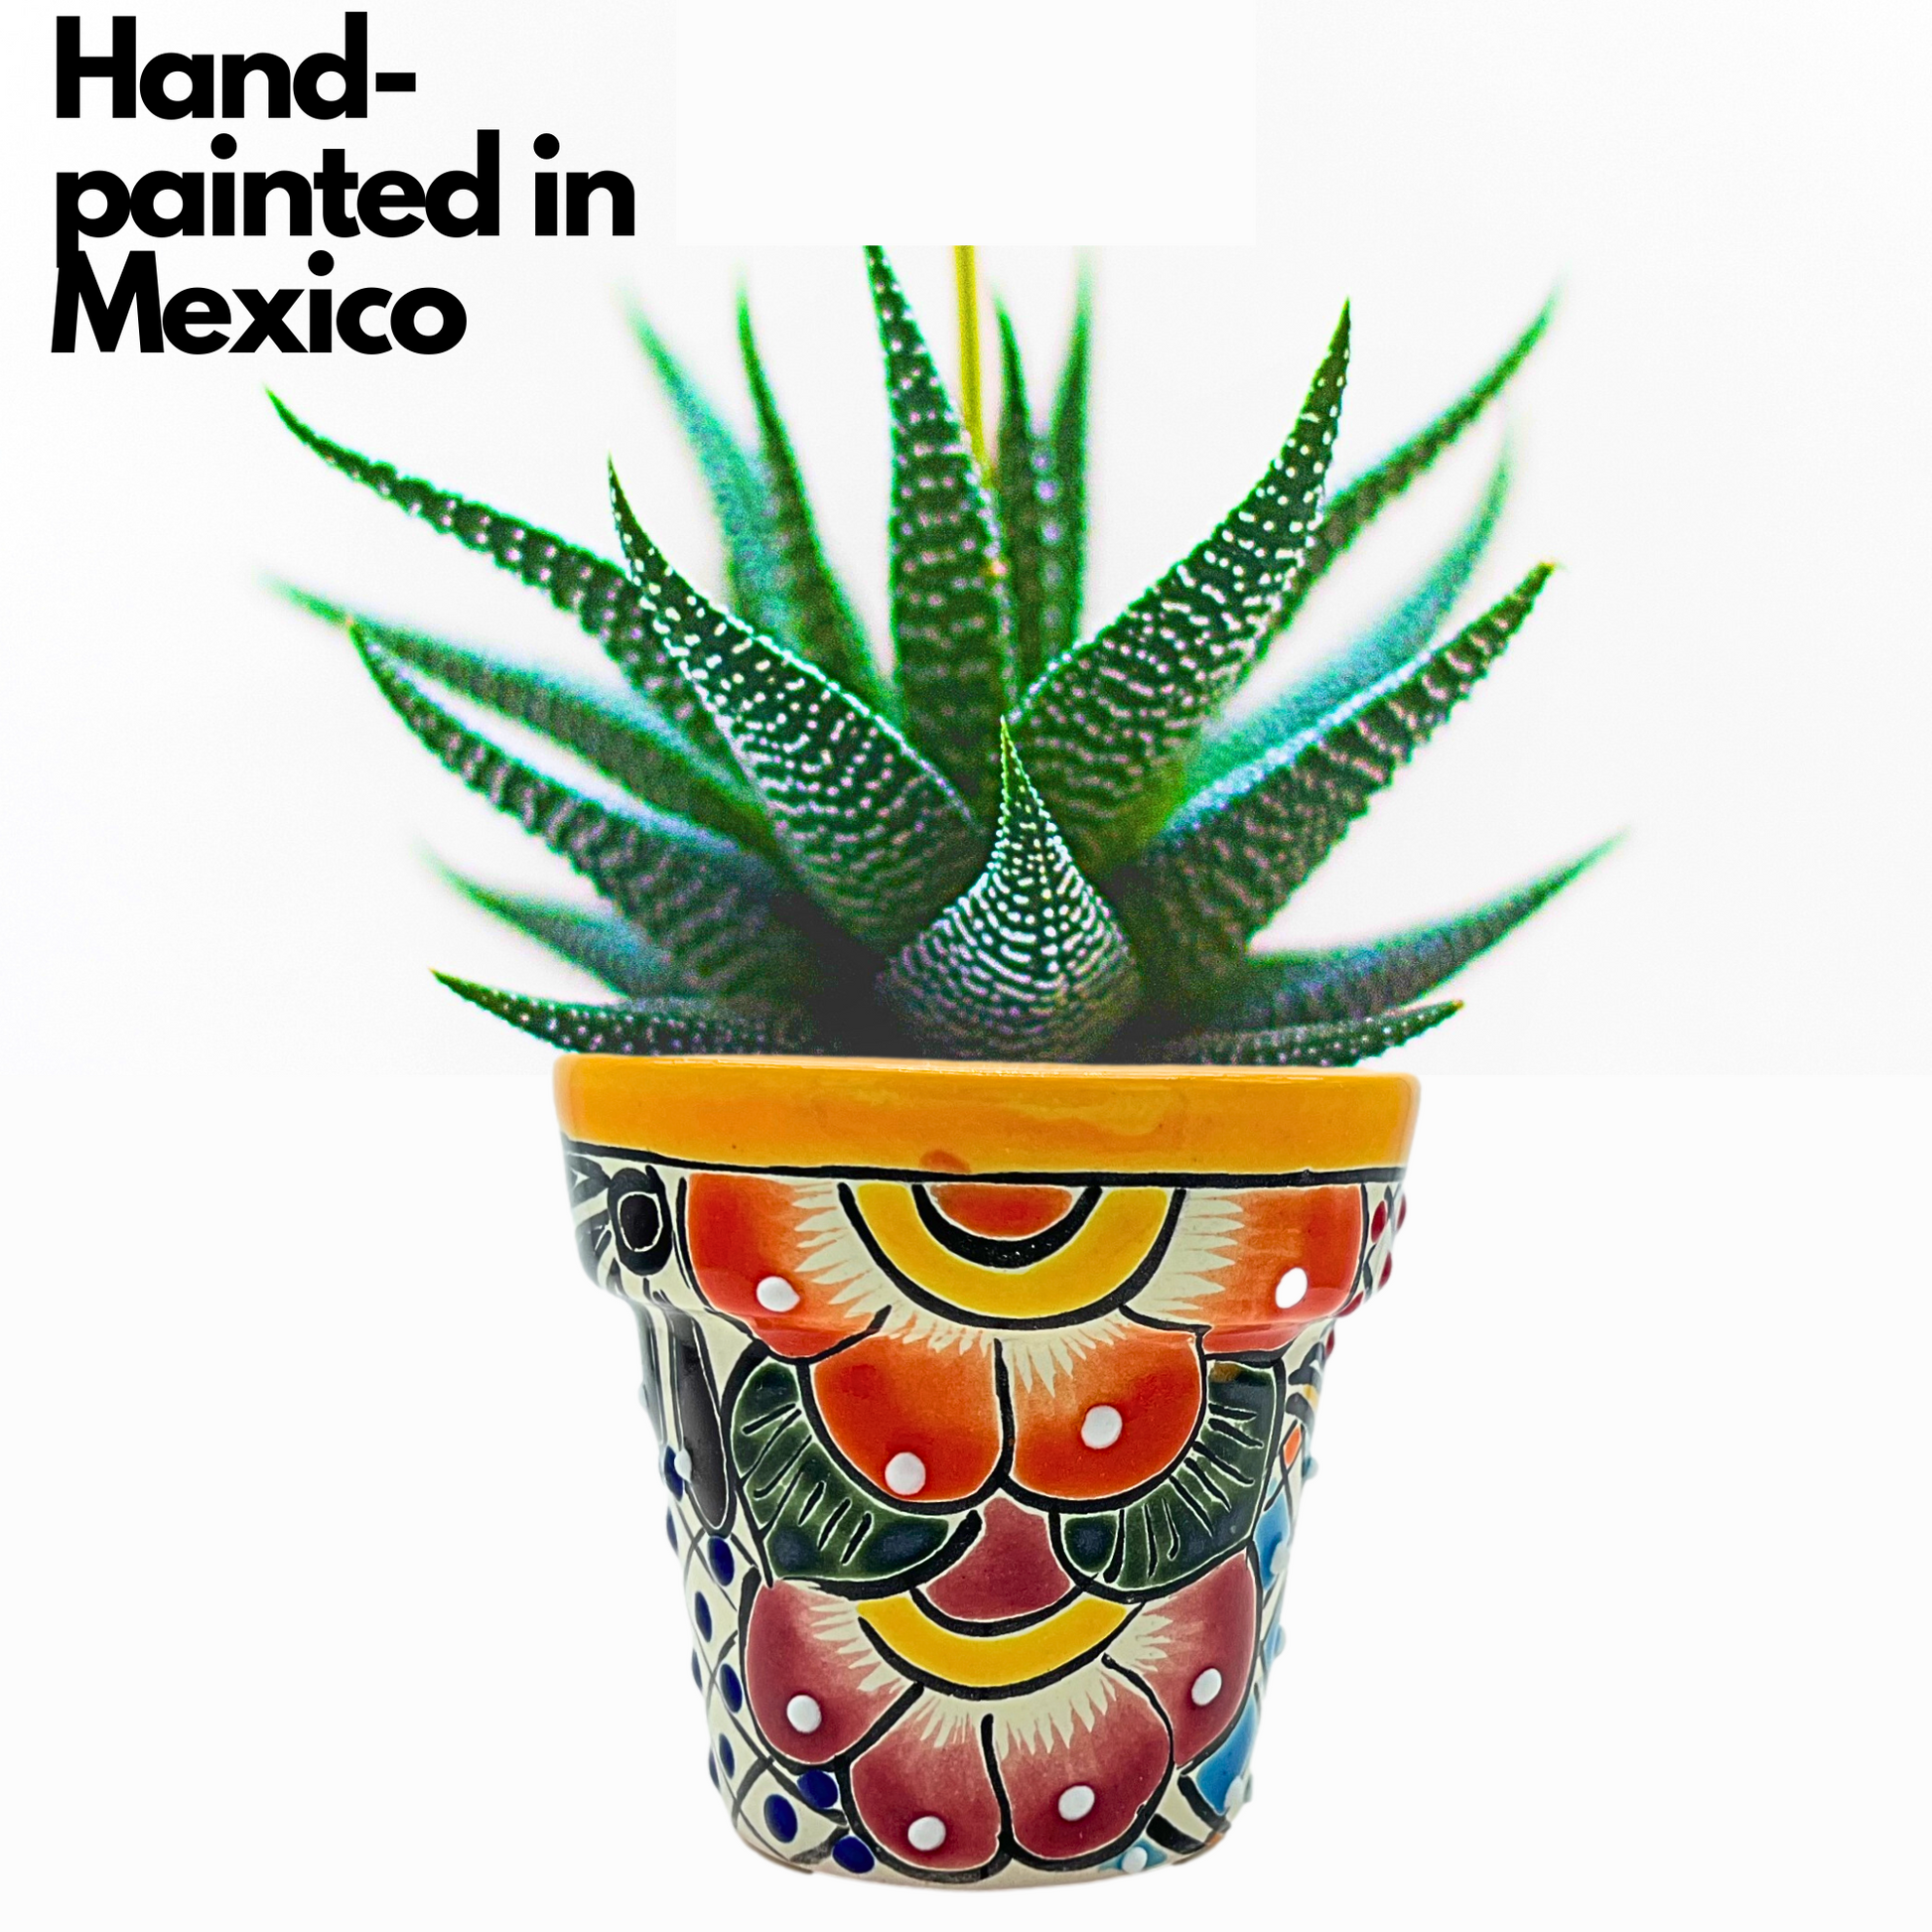 hand-painted in mexico Talavera Ceramic Mini Plant Pots, hand-painted with vibrant designs by Mexican artisans, perfect for small plants and interior decor.